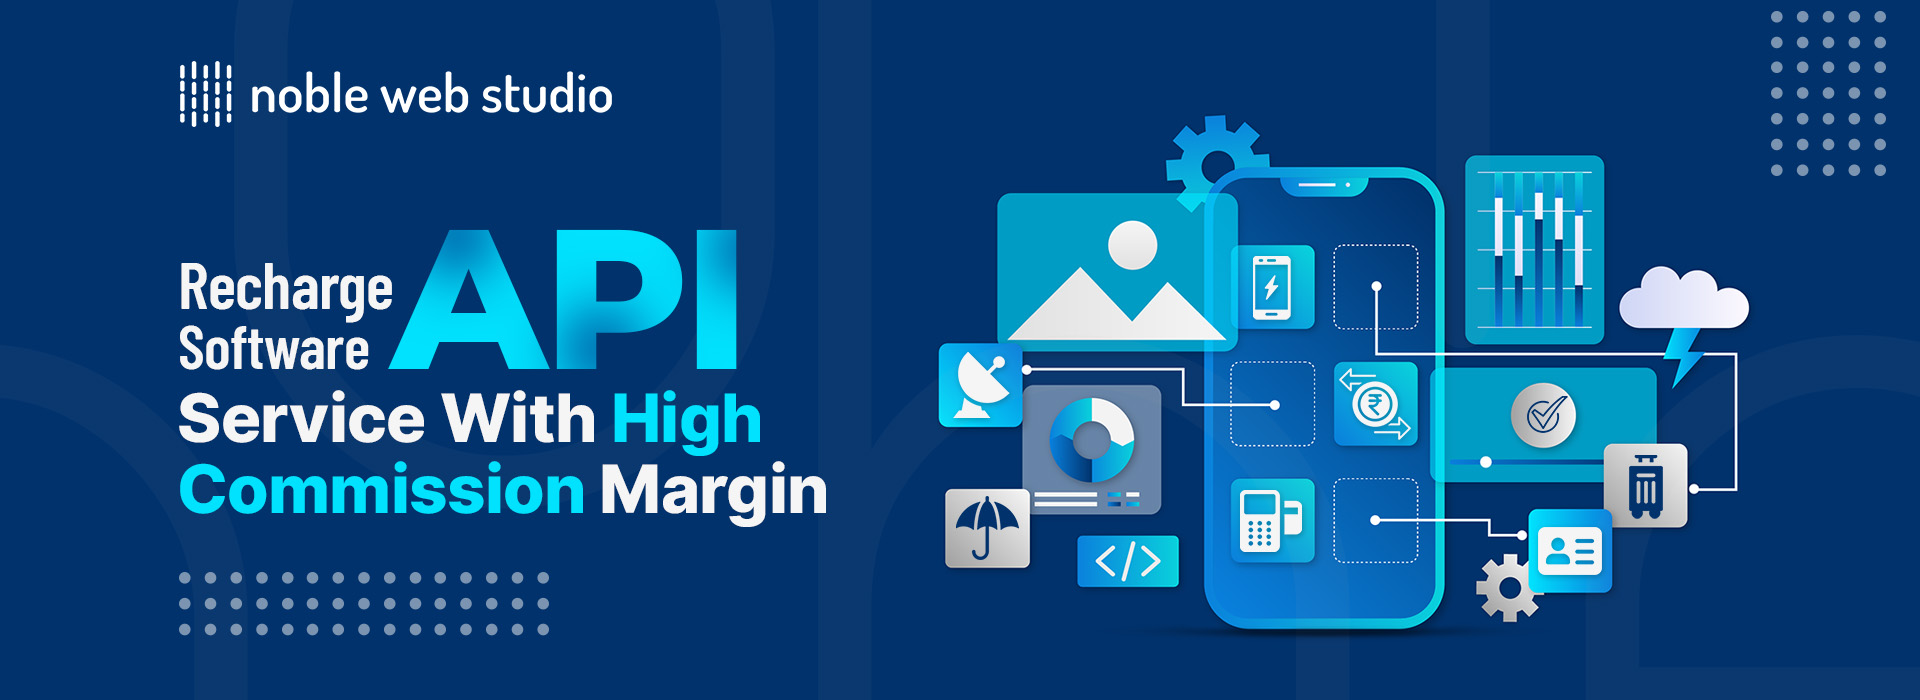 Recharge software API service with high commission margin